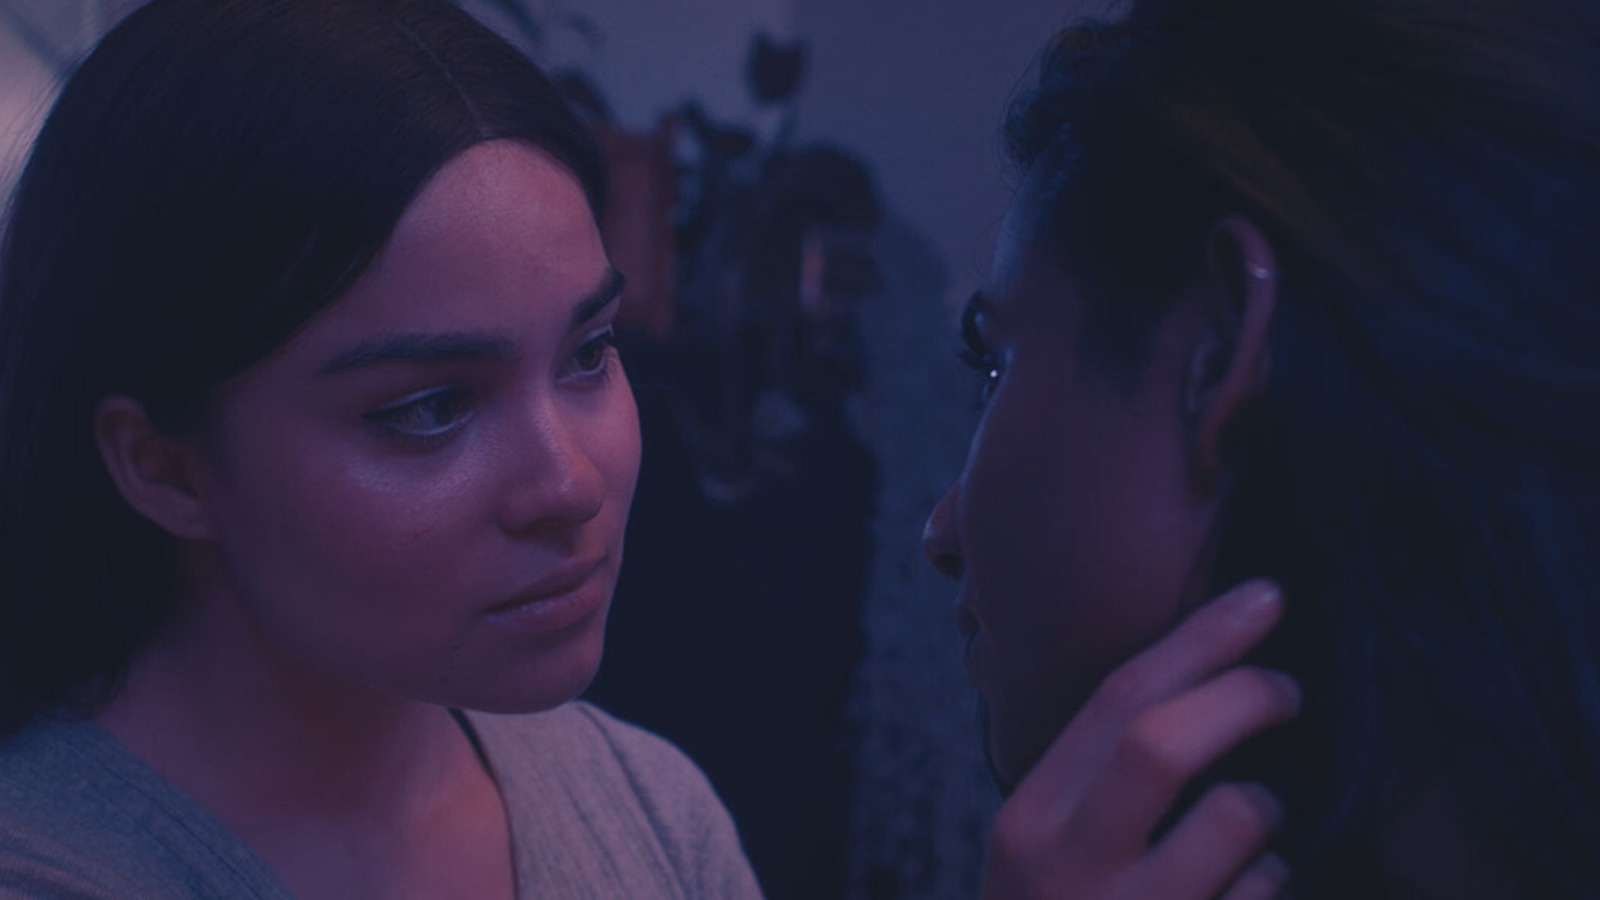 #A Tender Lesbian Love Story That Finds The Universal In The Specific [TIFF]